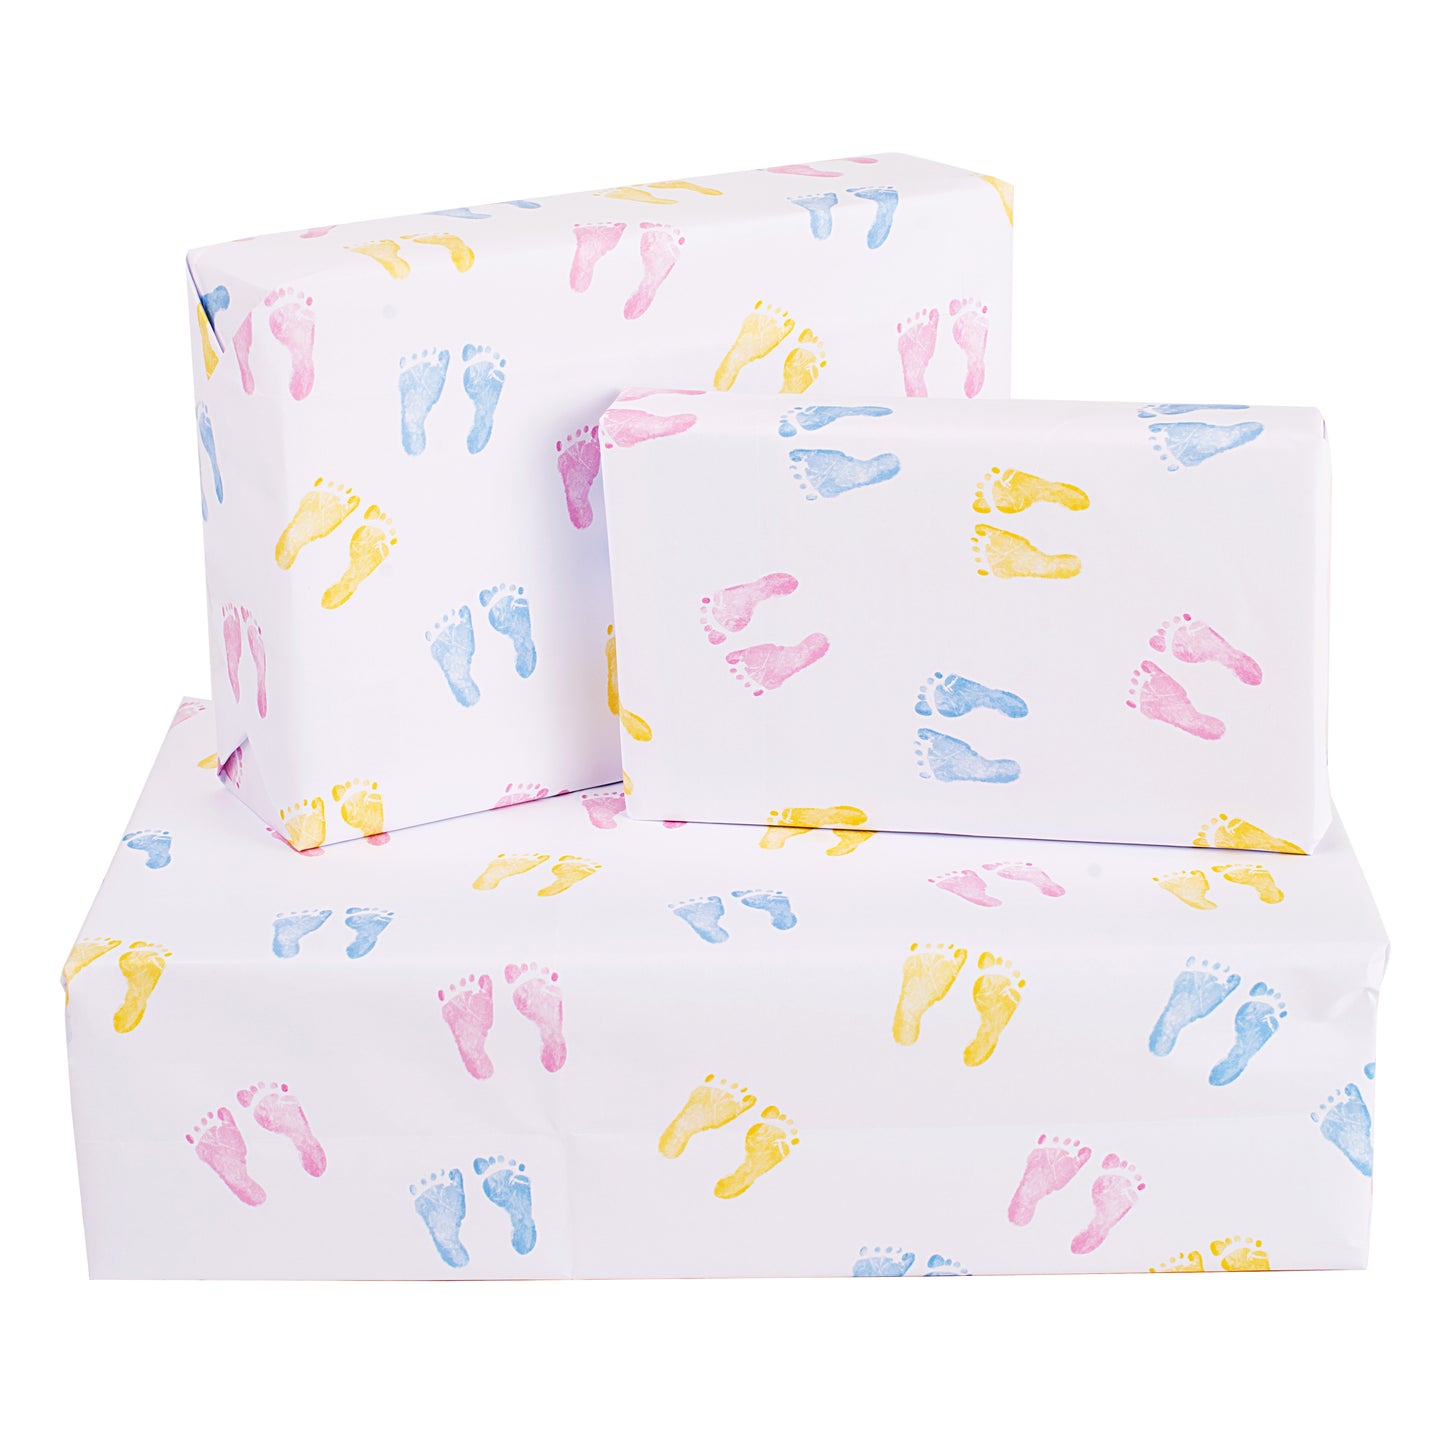 Baby Wrapping Paper - 6 Sheets of Gift Wrap - 'Baby Feet' - White Gift Wrap - For Boys Girls Kids Baby